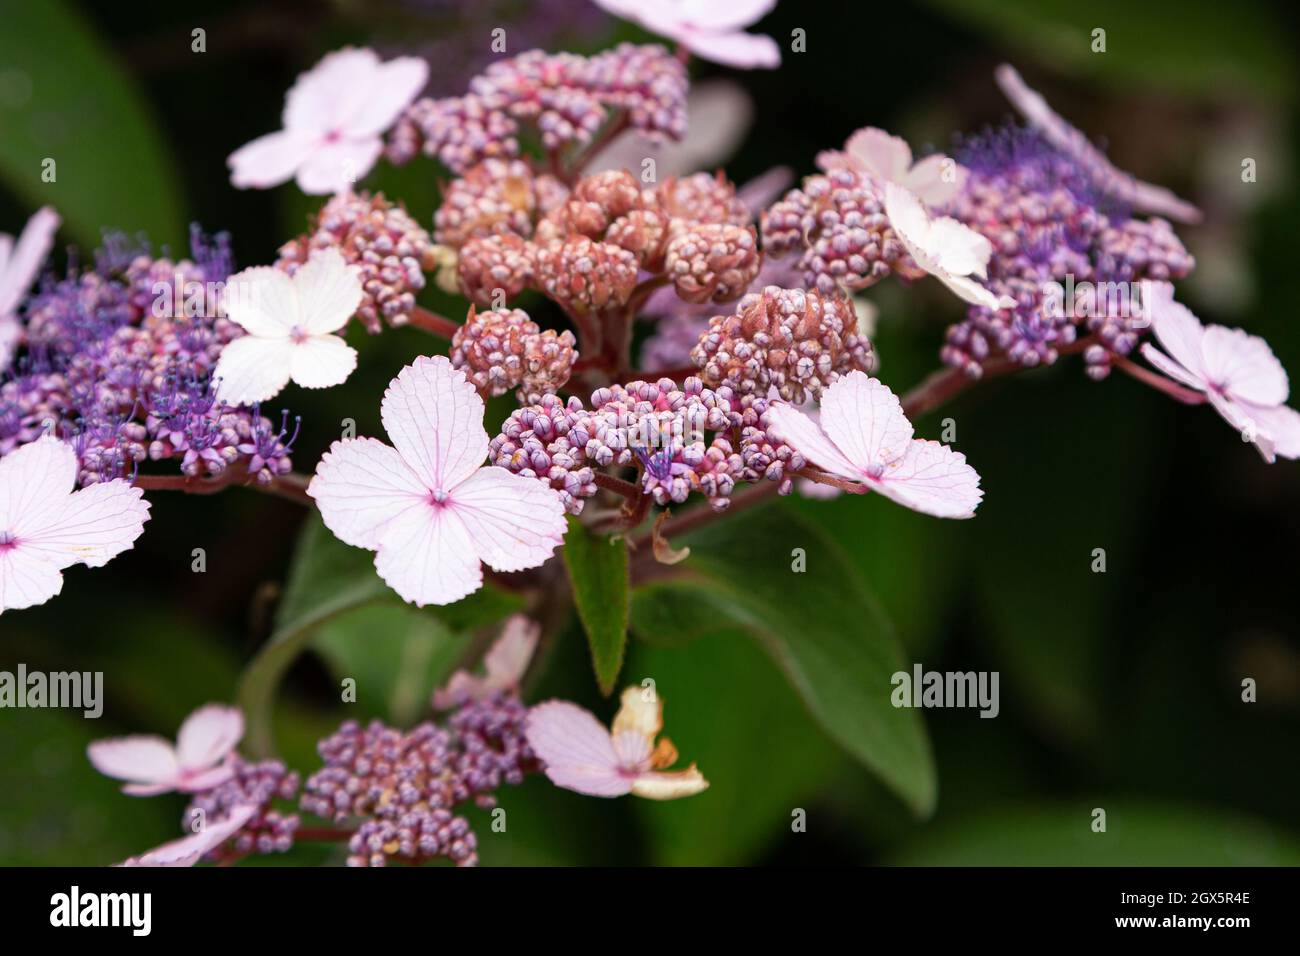 Pink Hydrangea flowers on display in an English garden Stock Photo